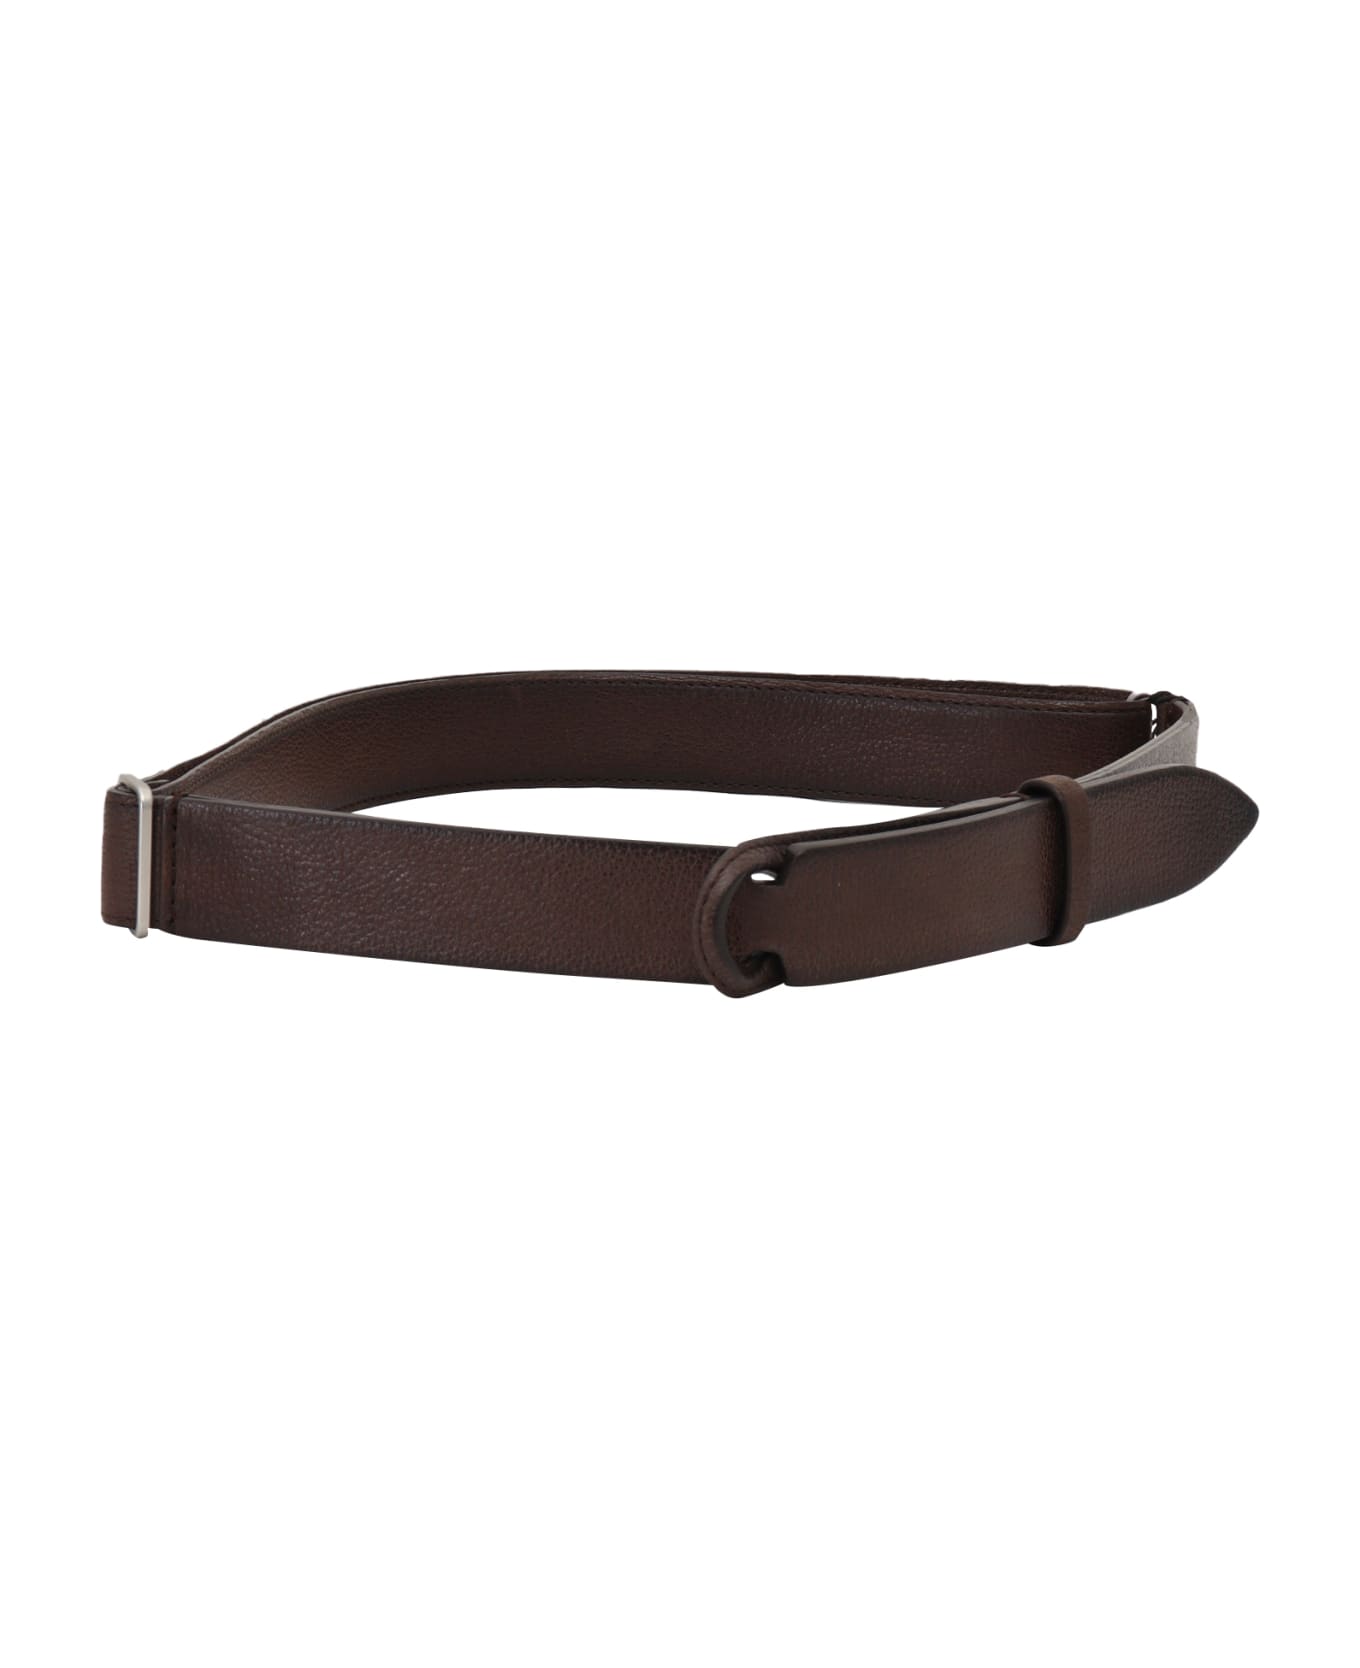 Orciani No Buckle Belt - BROWN